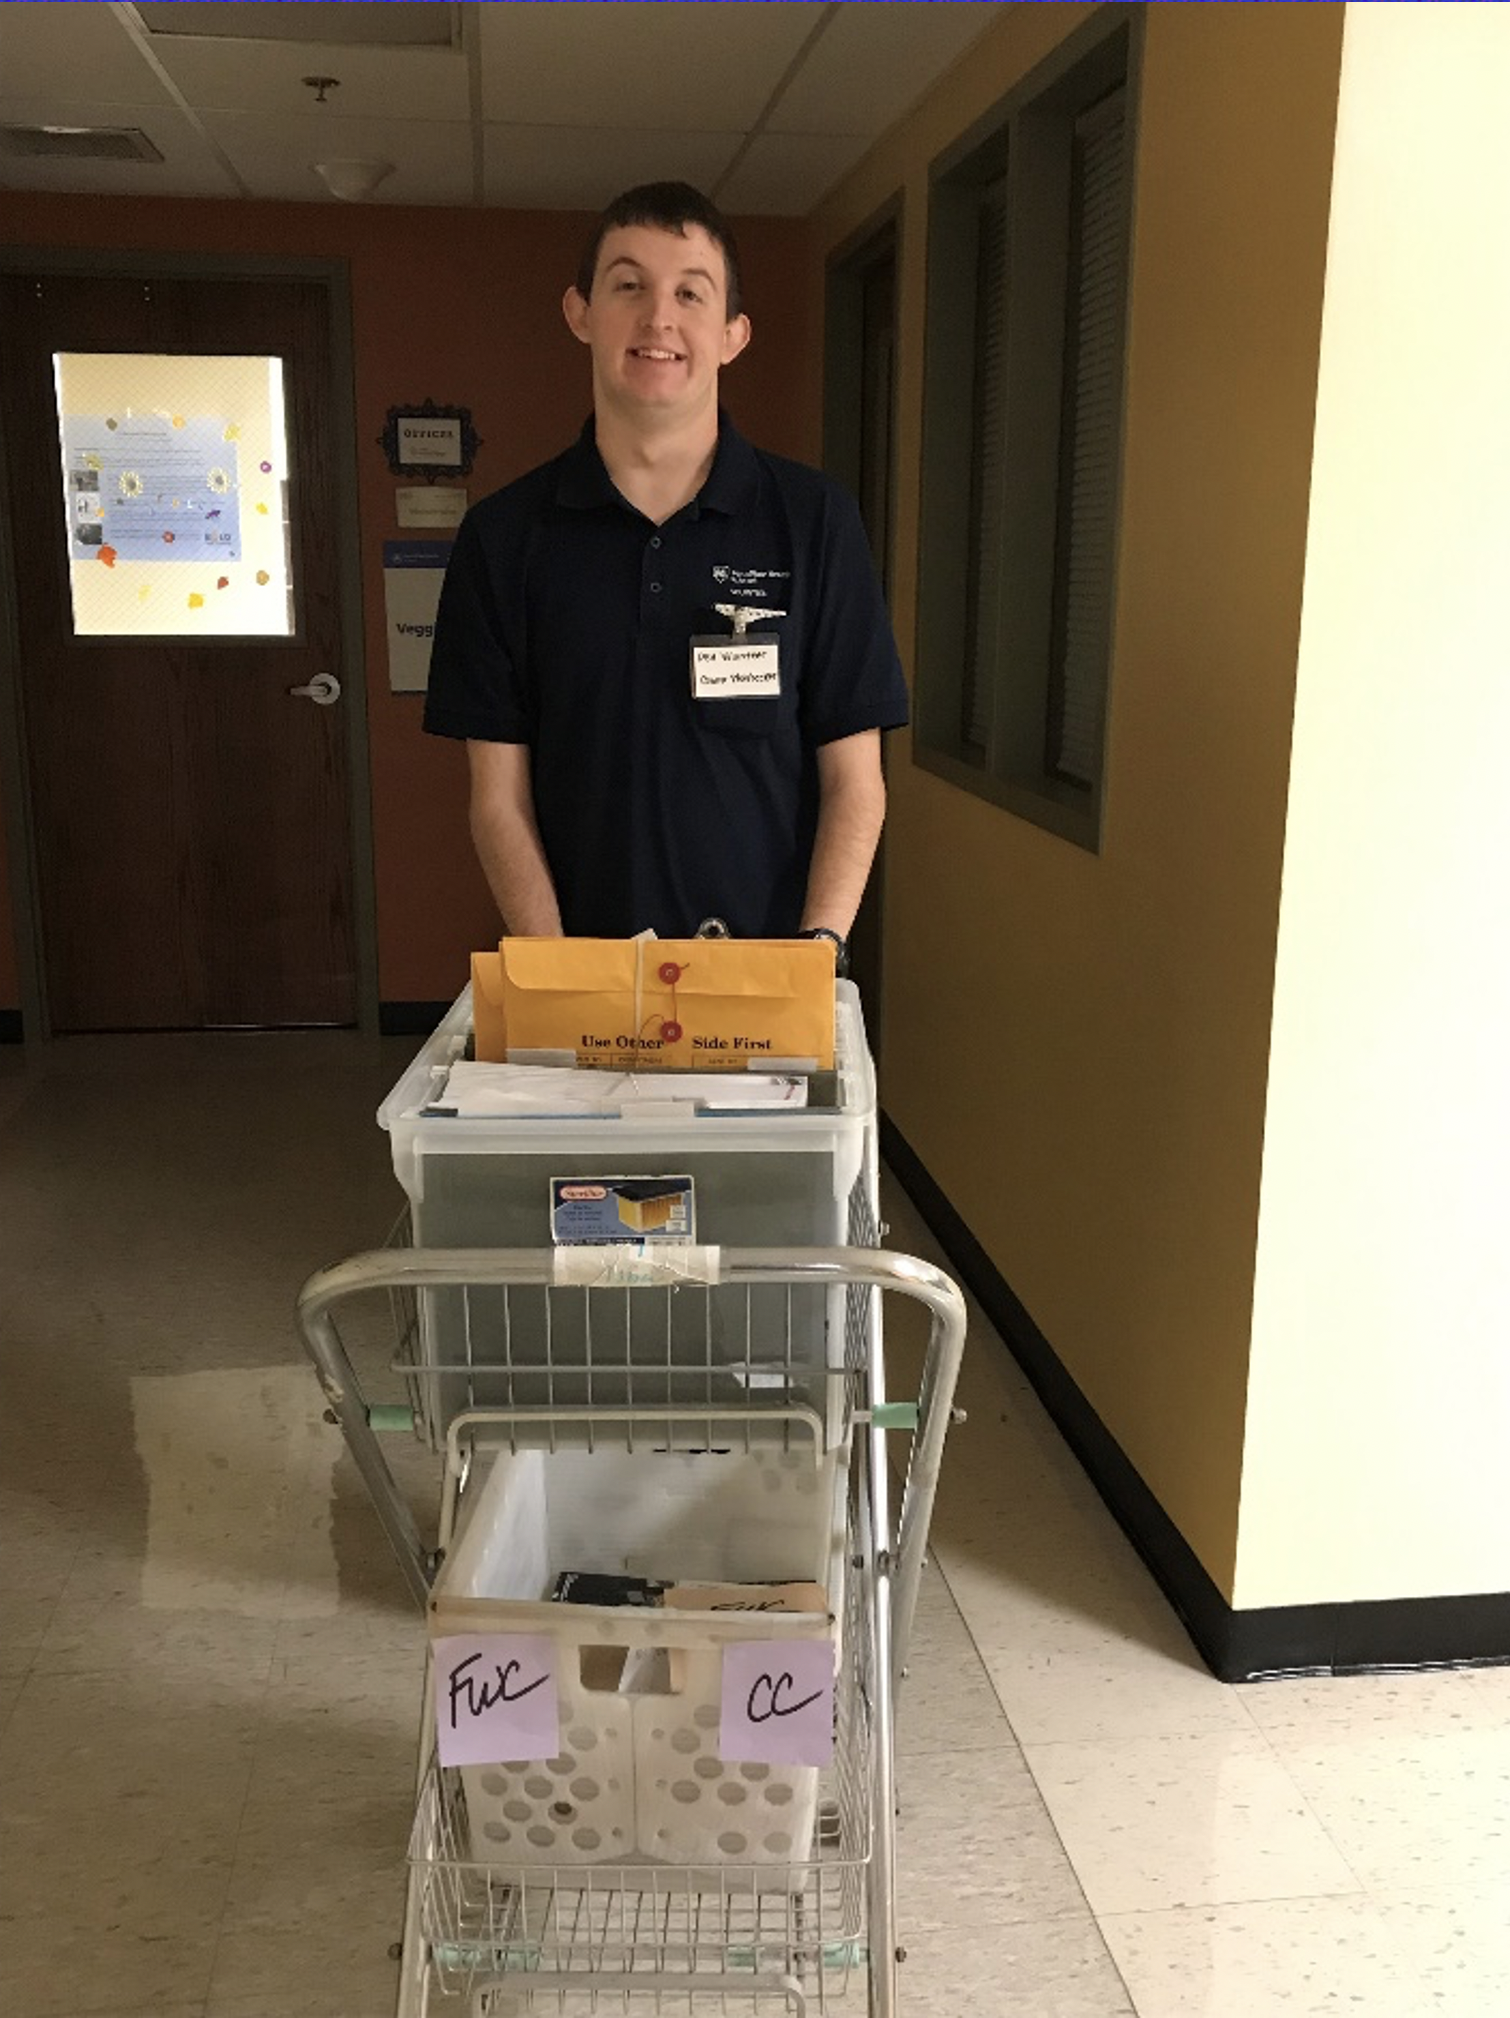 A Project SEARCH intern pushes a mail cart in a hallway